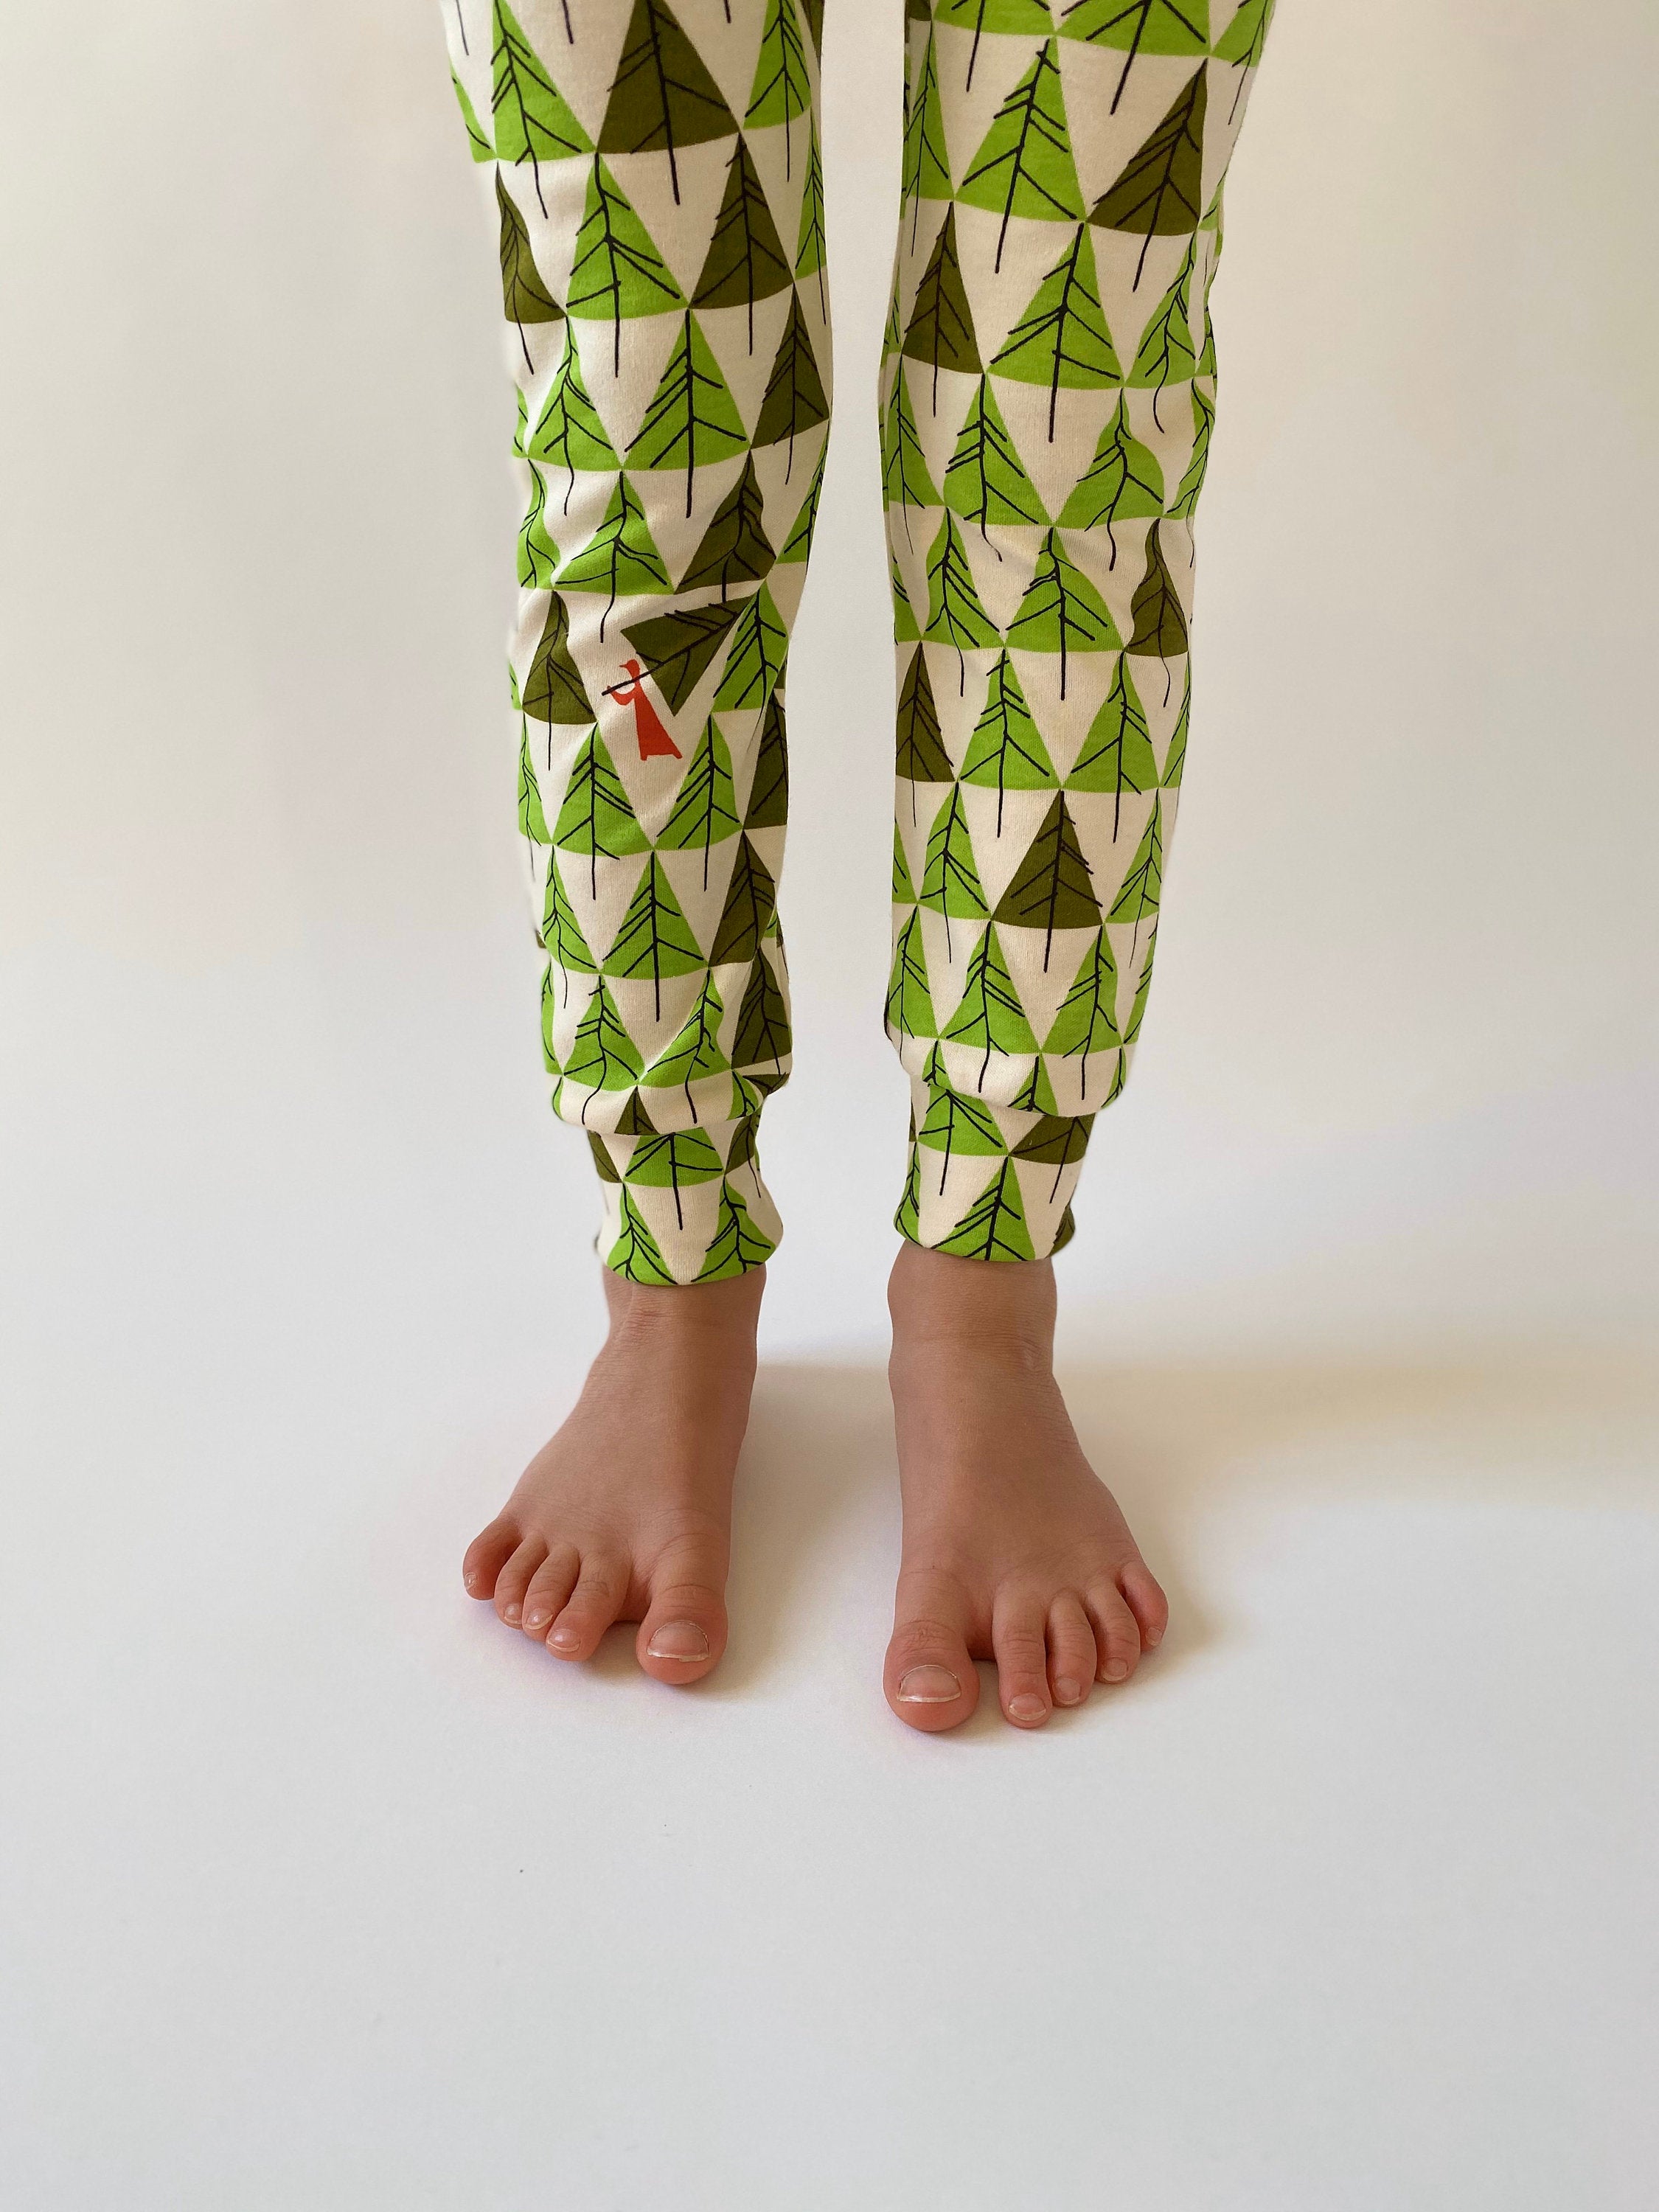 Eddie & Bee limited edition Christmas organic cotton leggings in  "Pick the perfect tree" print.